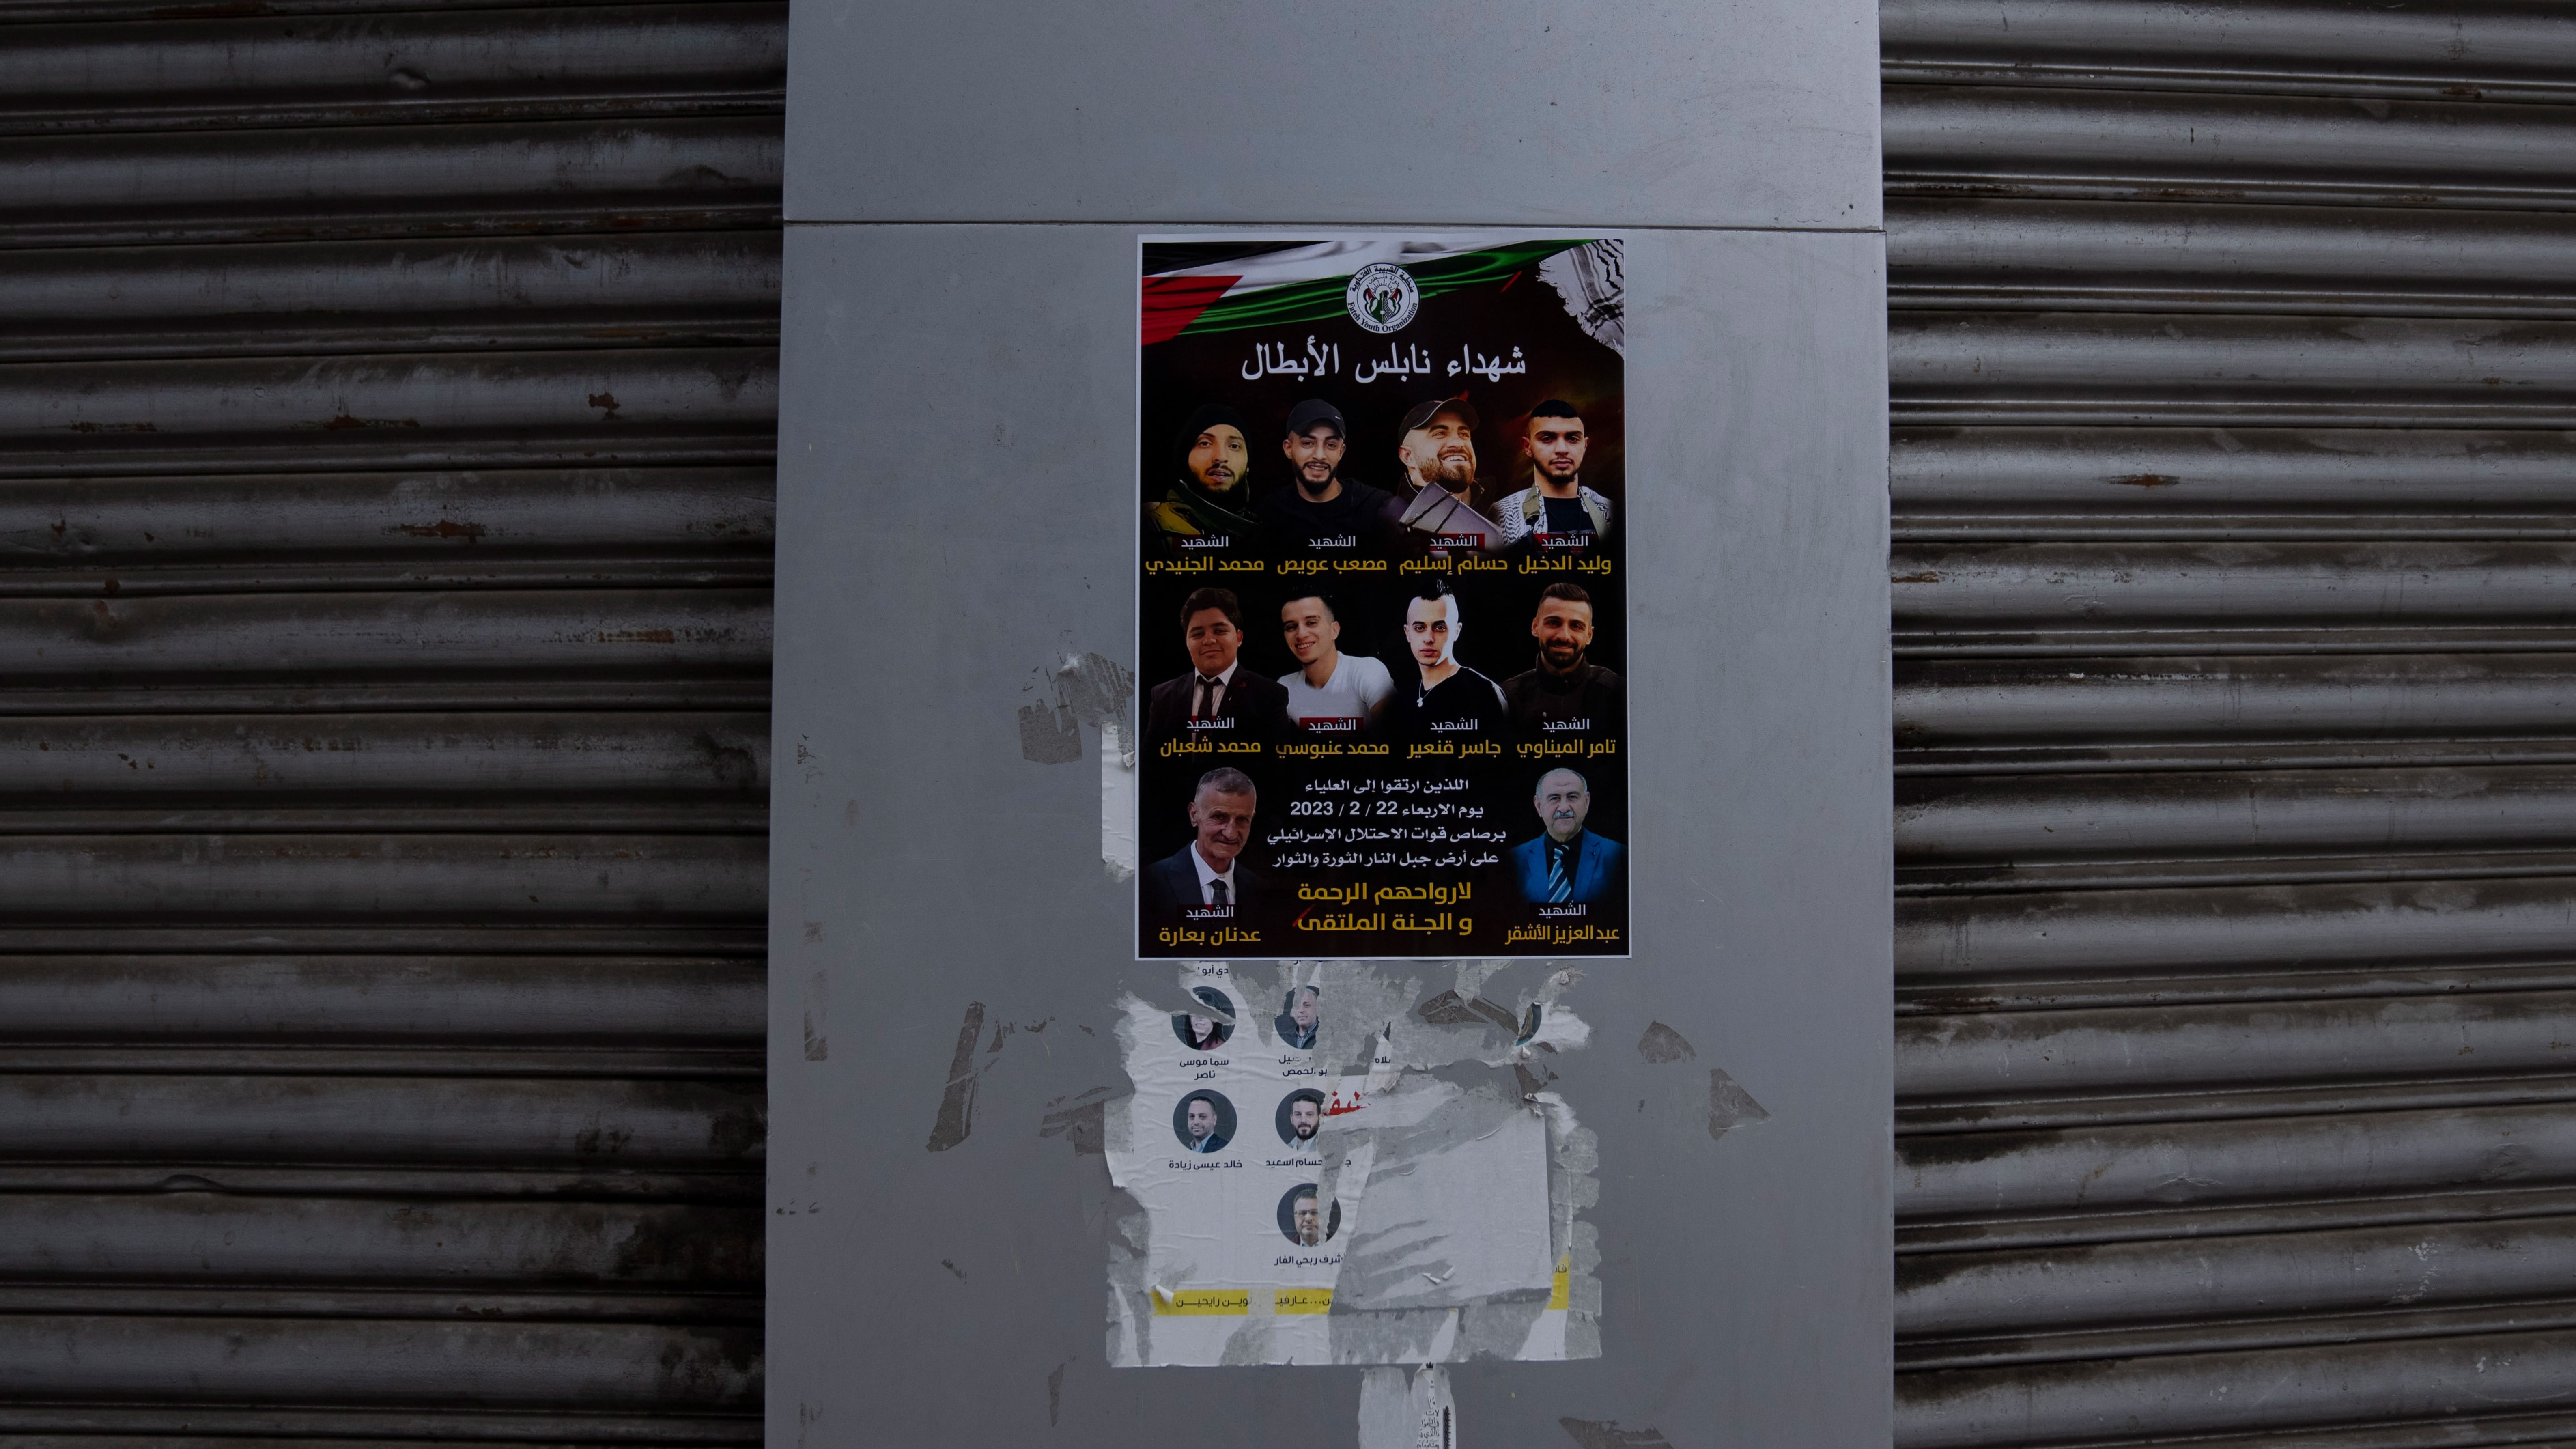 Picture of Hussam Aslim (2nd-R) in a poster of 11 Palestinians killed in Nablus raid hung up on a wall in Ramallah on 23 February 2023 (AP)